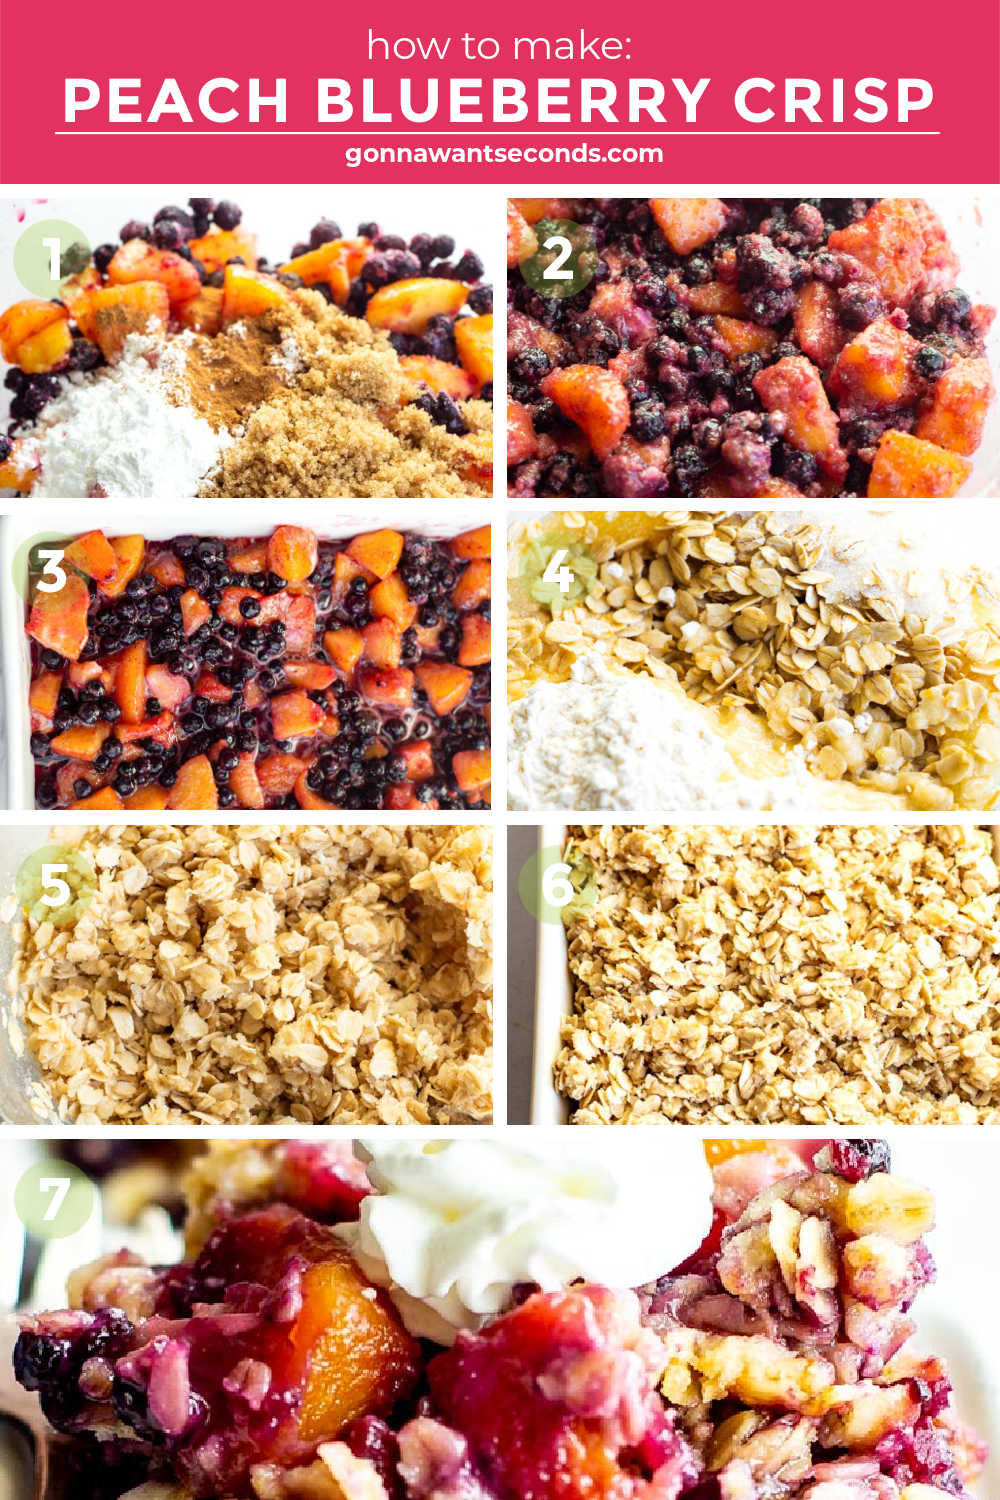 Step by step how to make Peach Blueberry Crisp